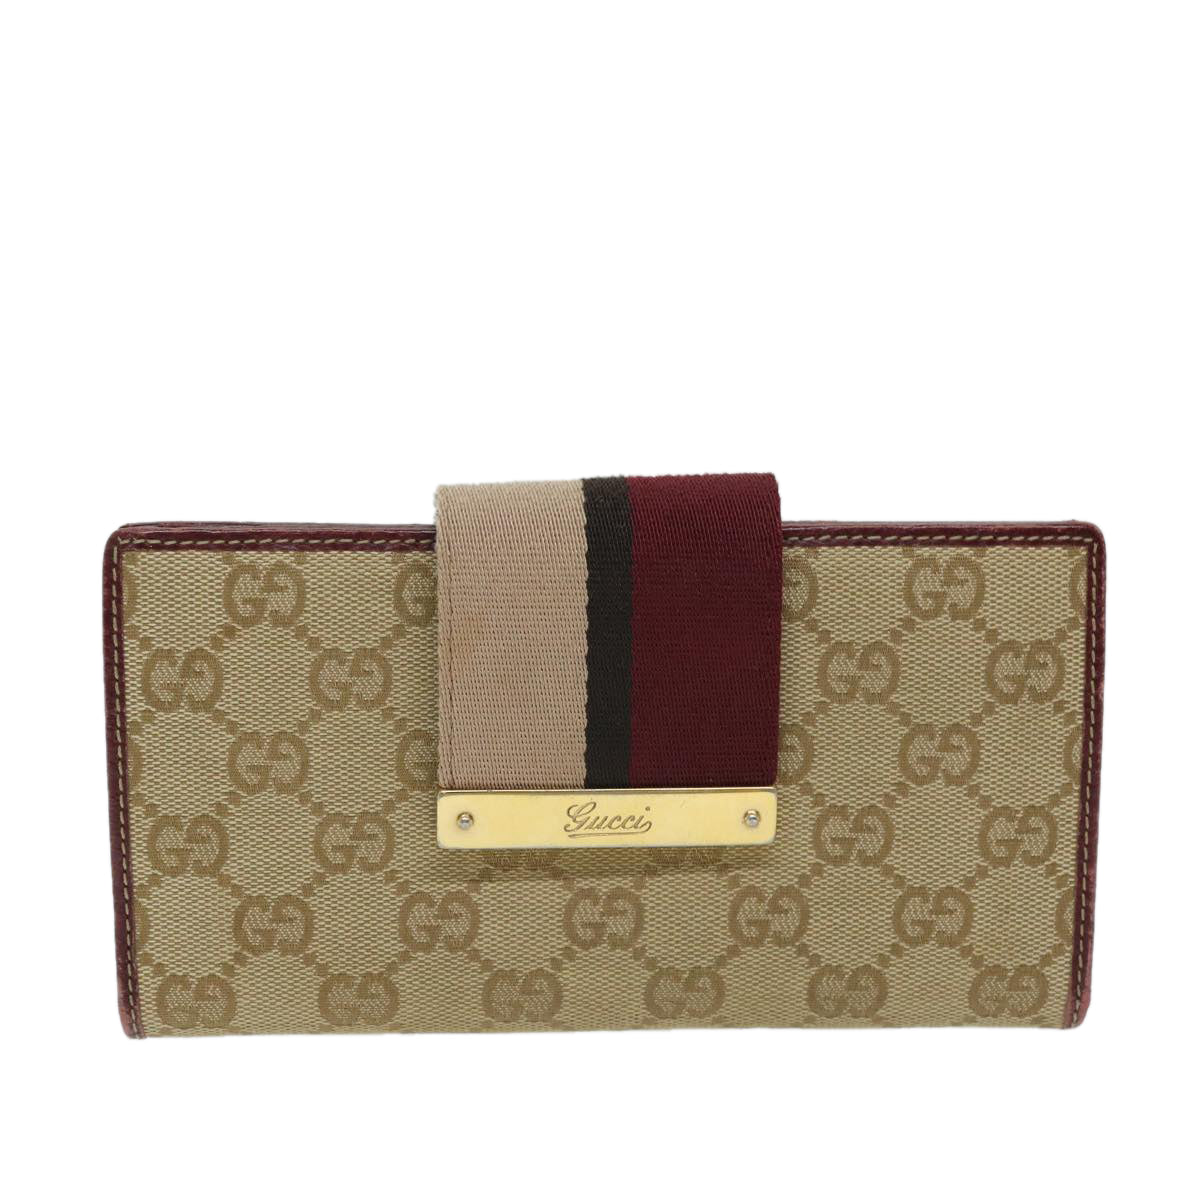 GUCCI GG Canvas Wallet Beige Green Red 181668 Auth fm3304 - 0